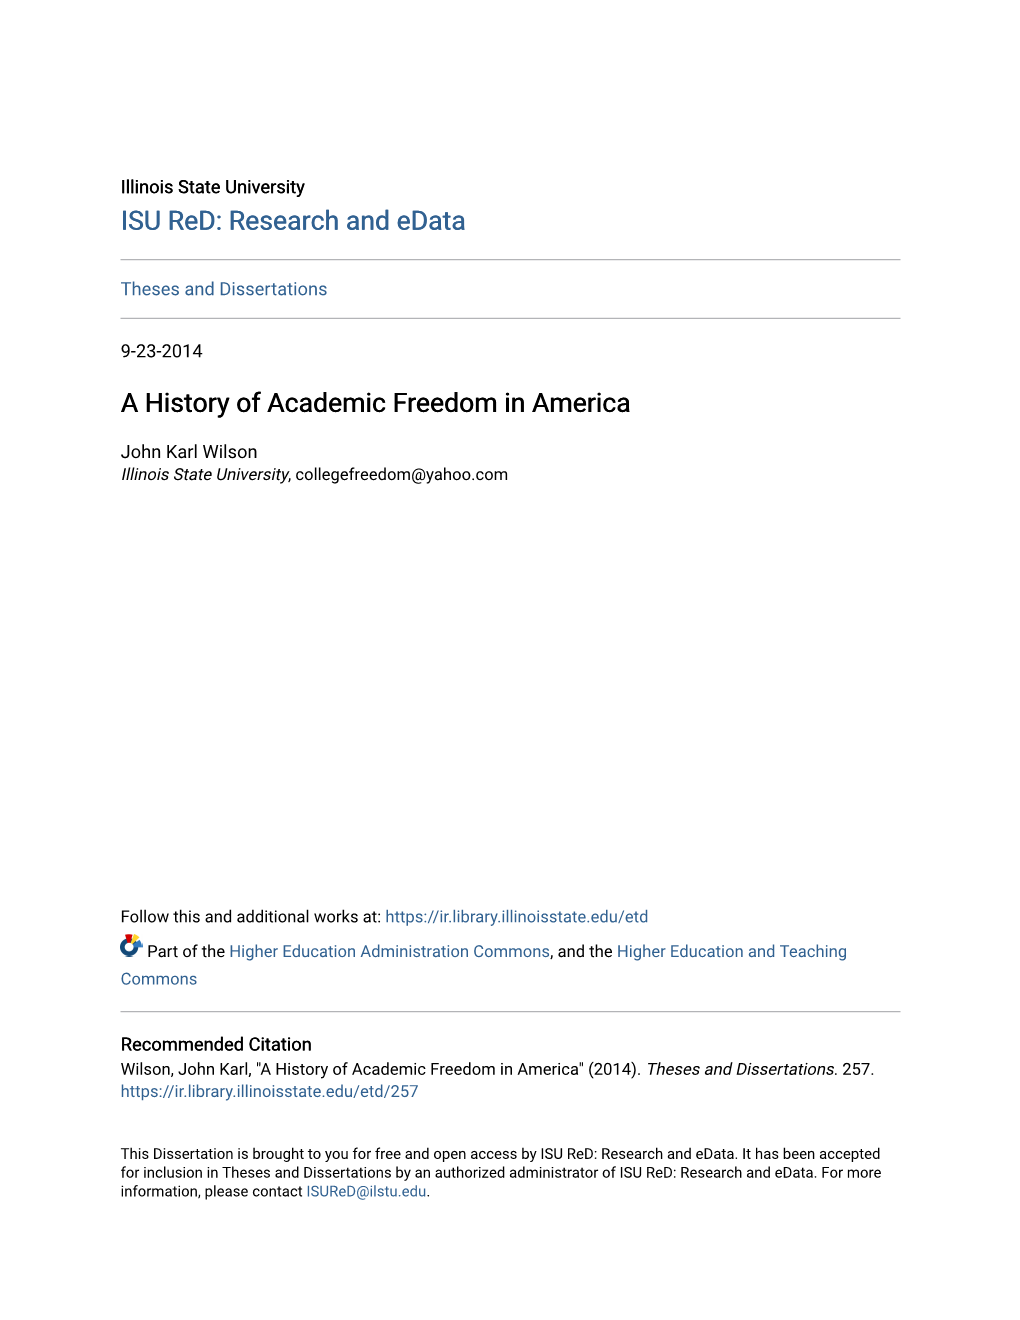 A History of Academic Freedom in America